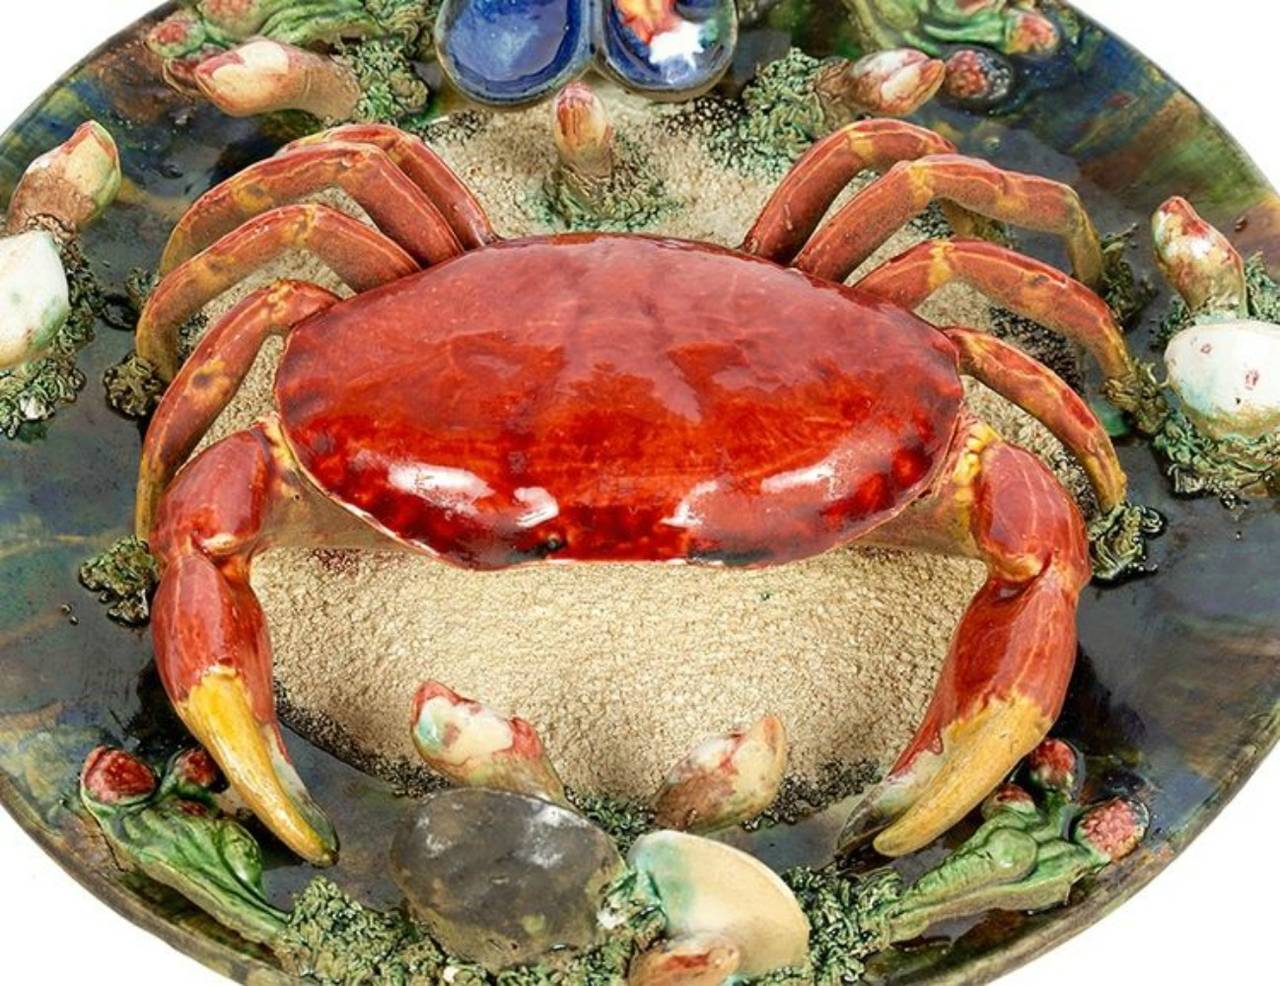 Highly collectible Palissy style trompe-l'oeil crab plate. Portuguese majolica platter features a vibrant red crab on a textured and mottled ground of sand, mussels, seaweed and shells. Impressed marks on the reverse.

We have a set of four